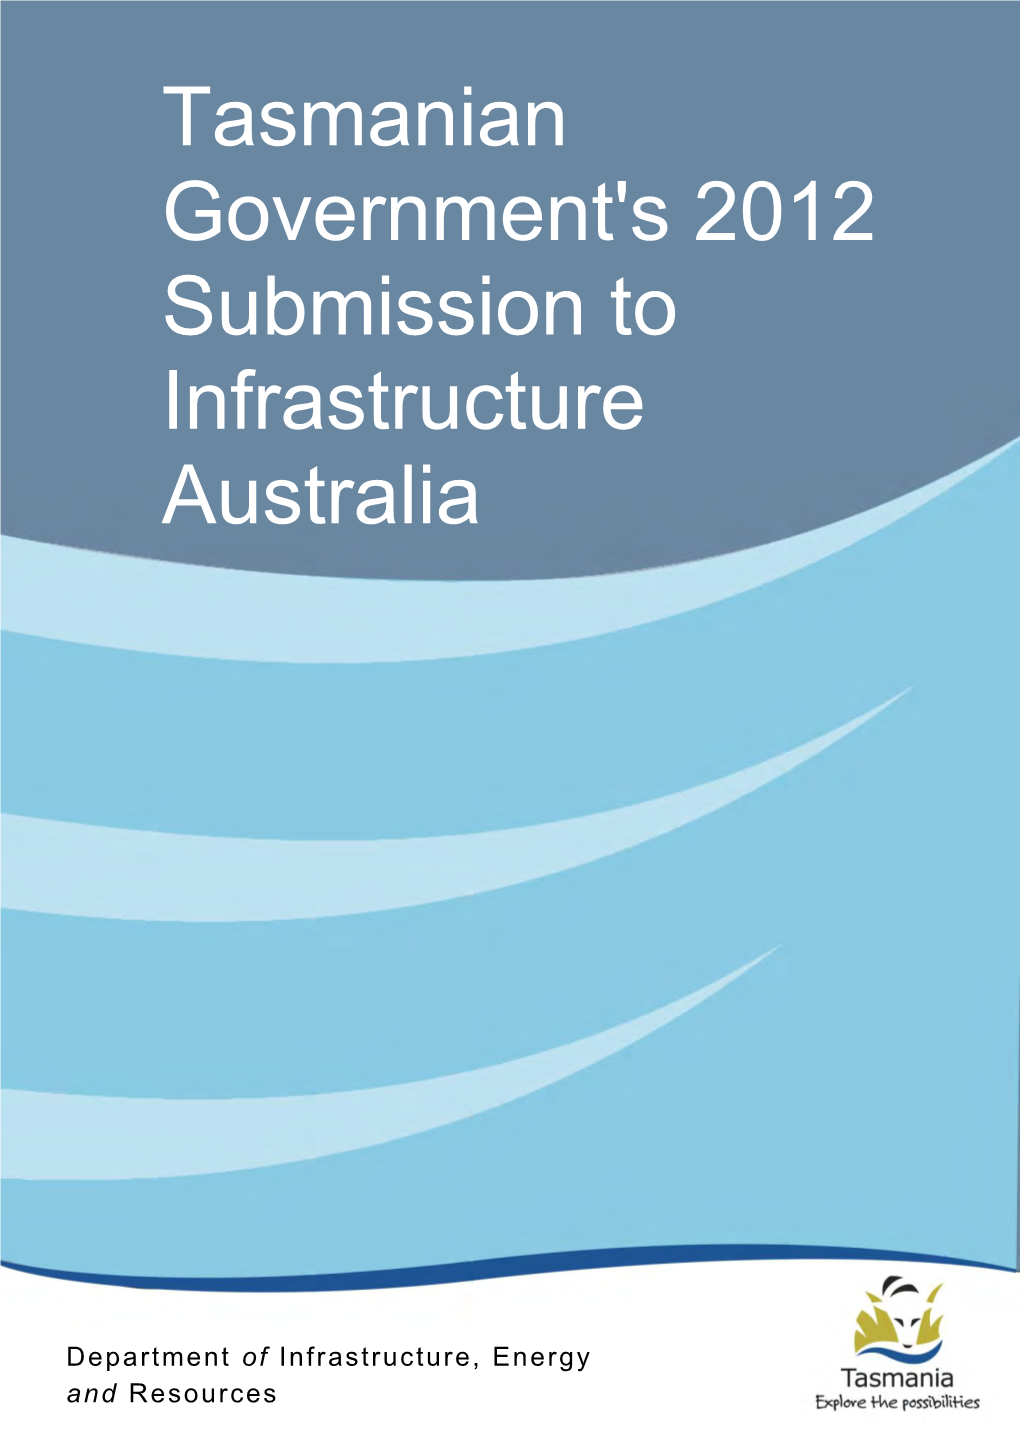 Tasmanian Government's 2012 Submission to Infrastructure Australia